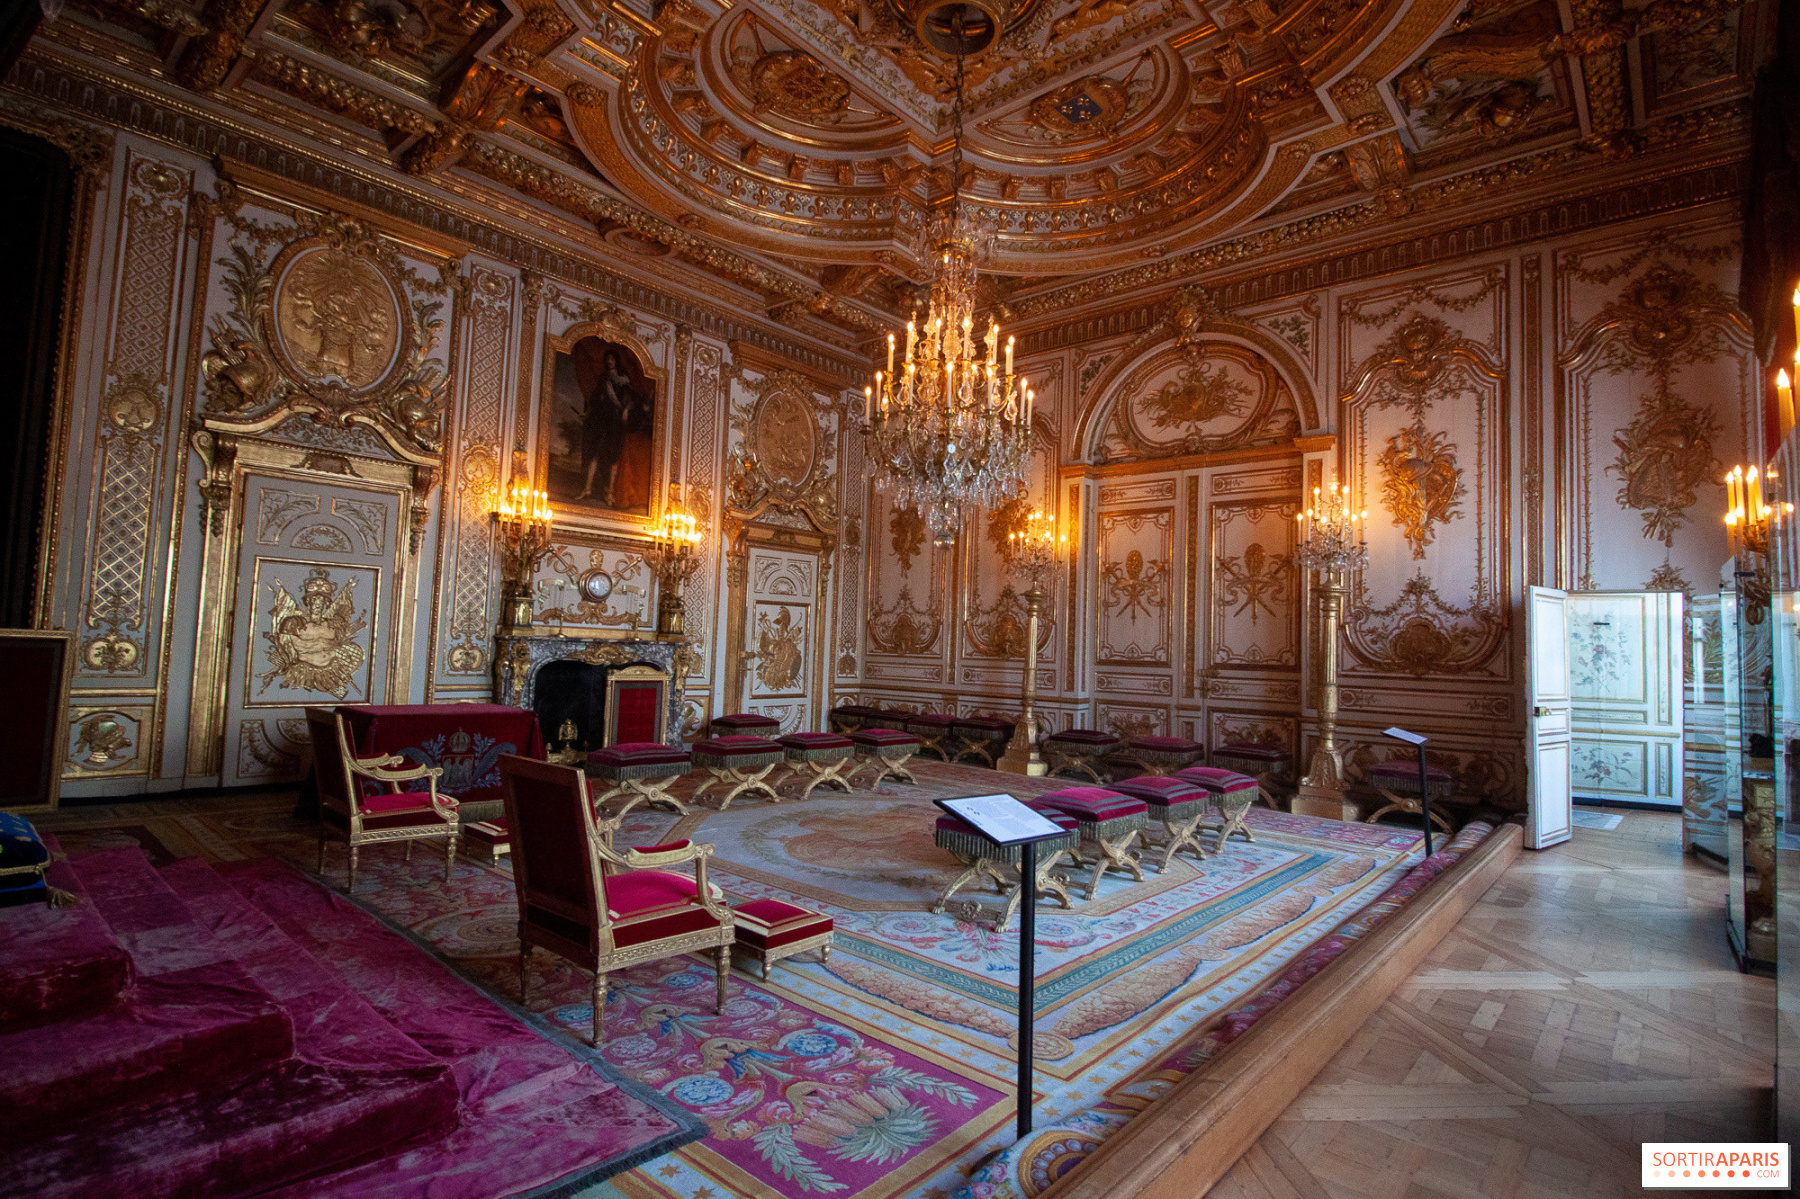 Interactive investigations at the Château de Fontainebleau: an